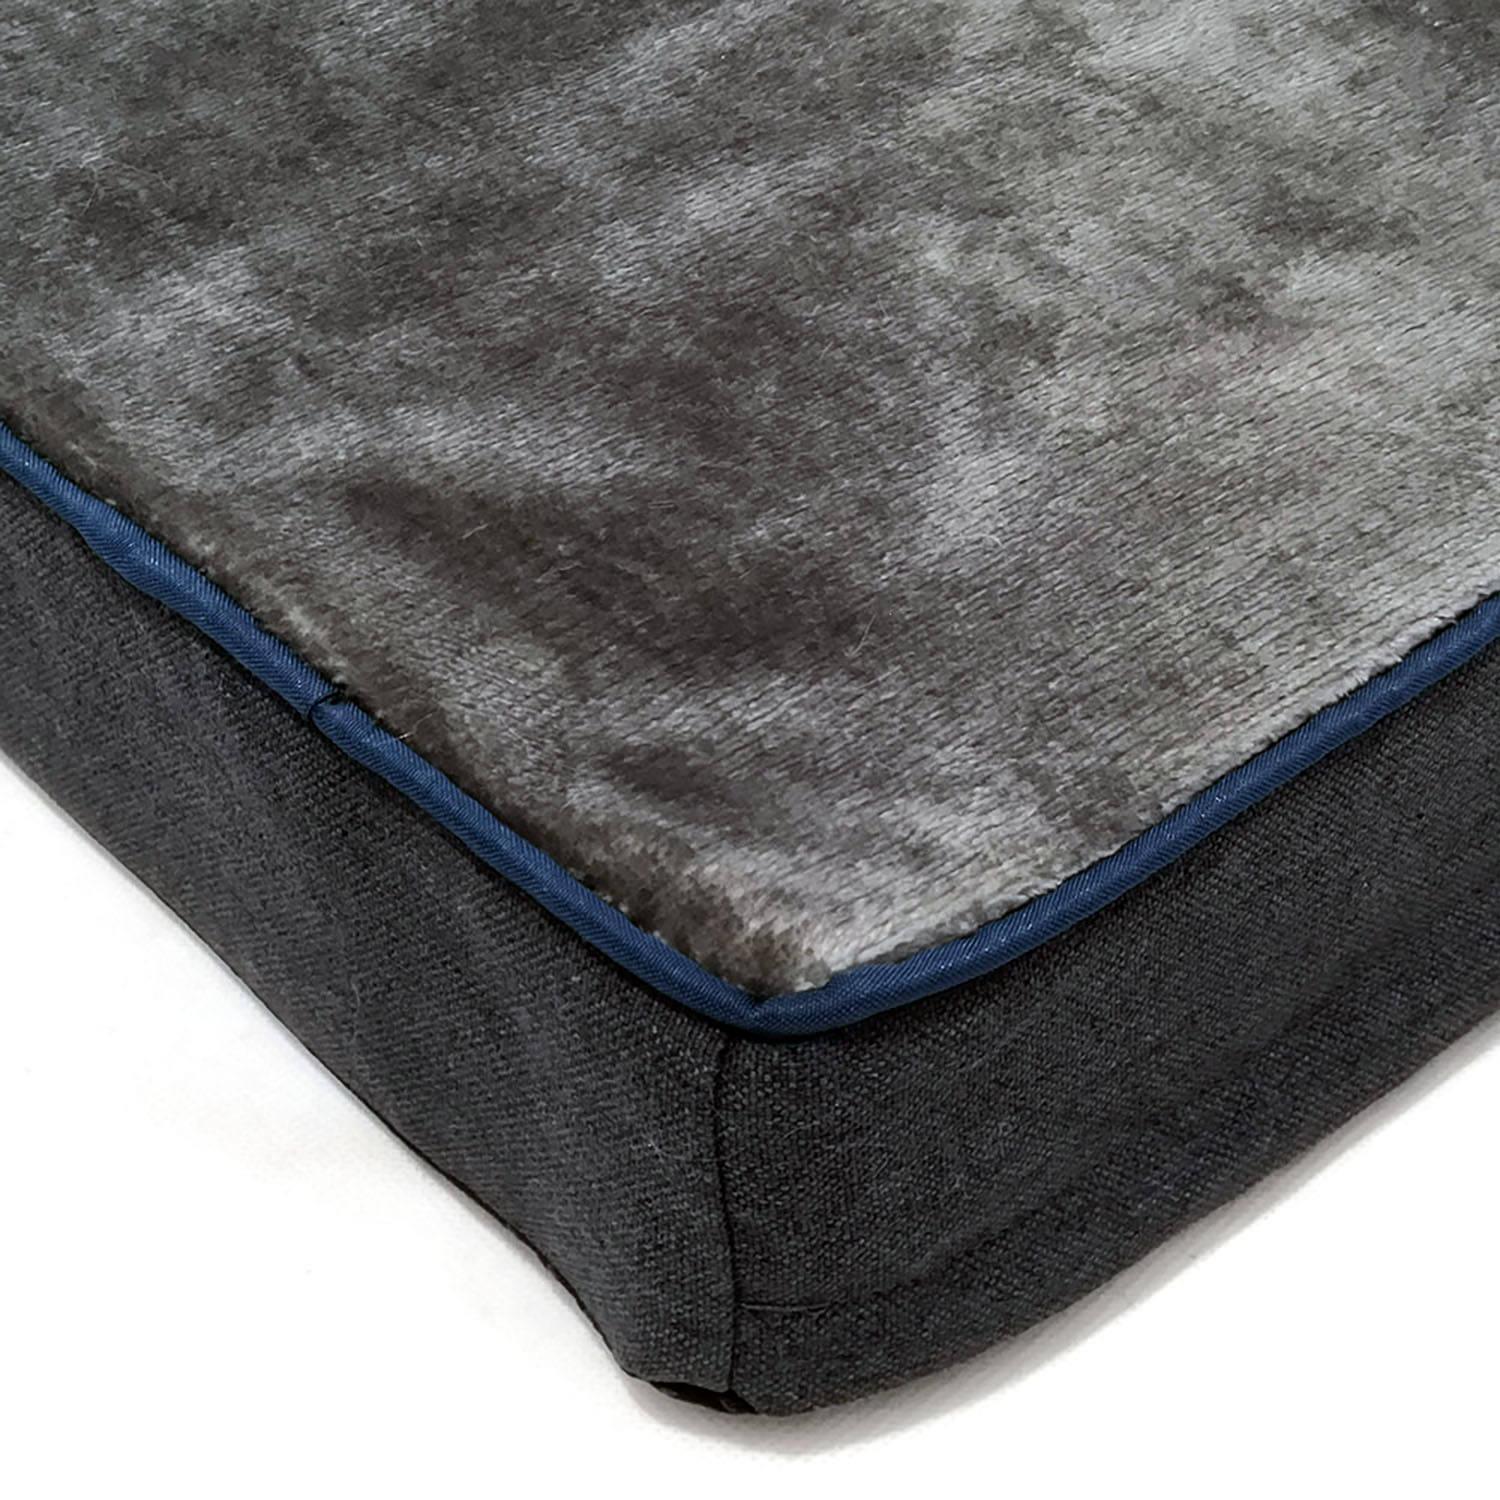 Memory Foam Dog Bed Ortopedic Dog Bed Luxurious Calming Dogs Bed Mats